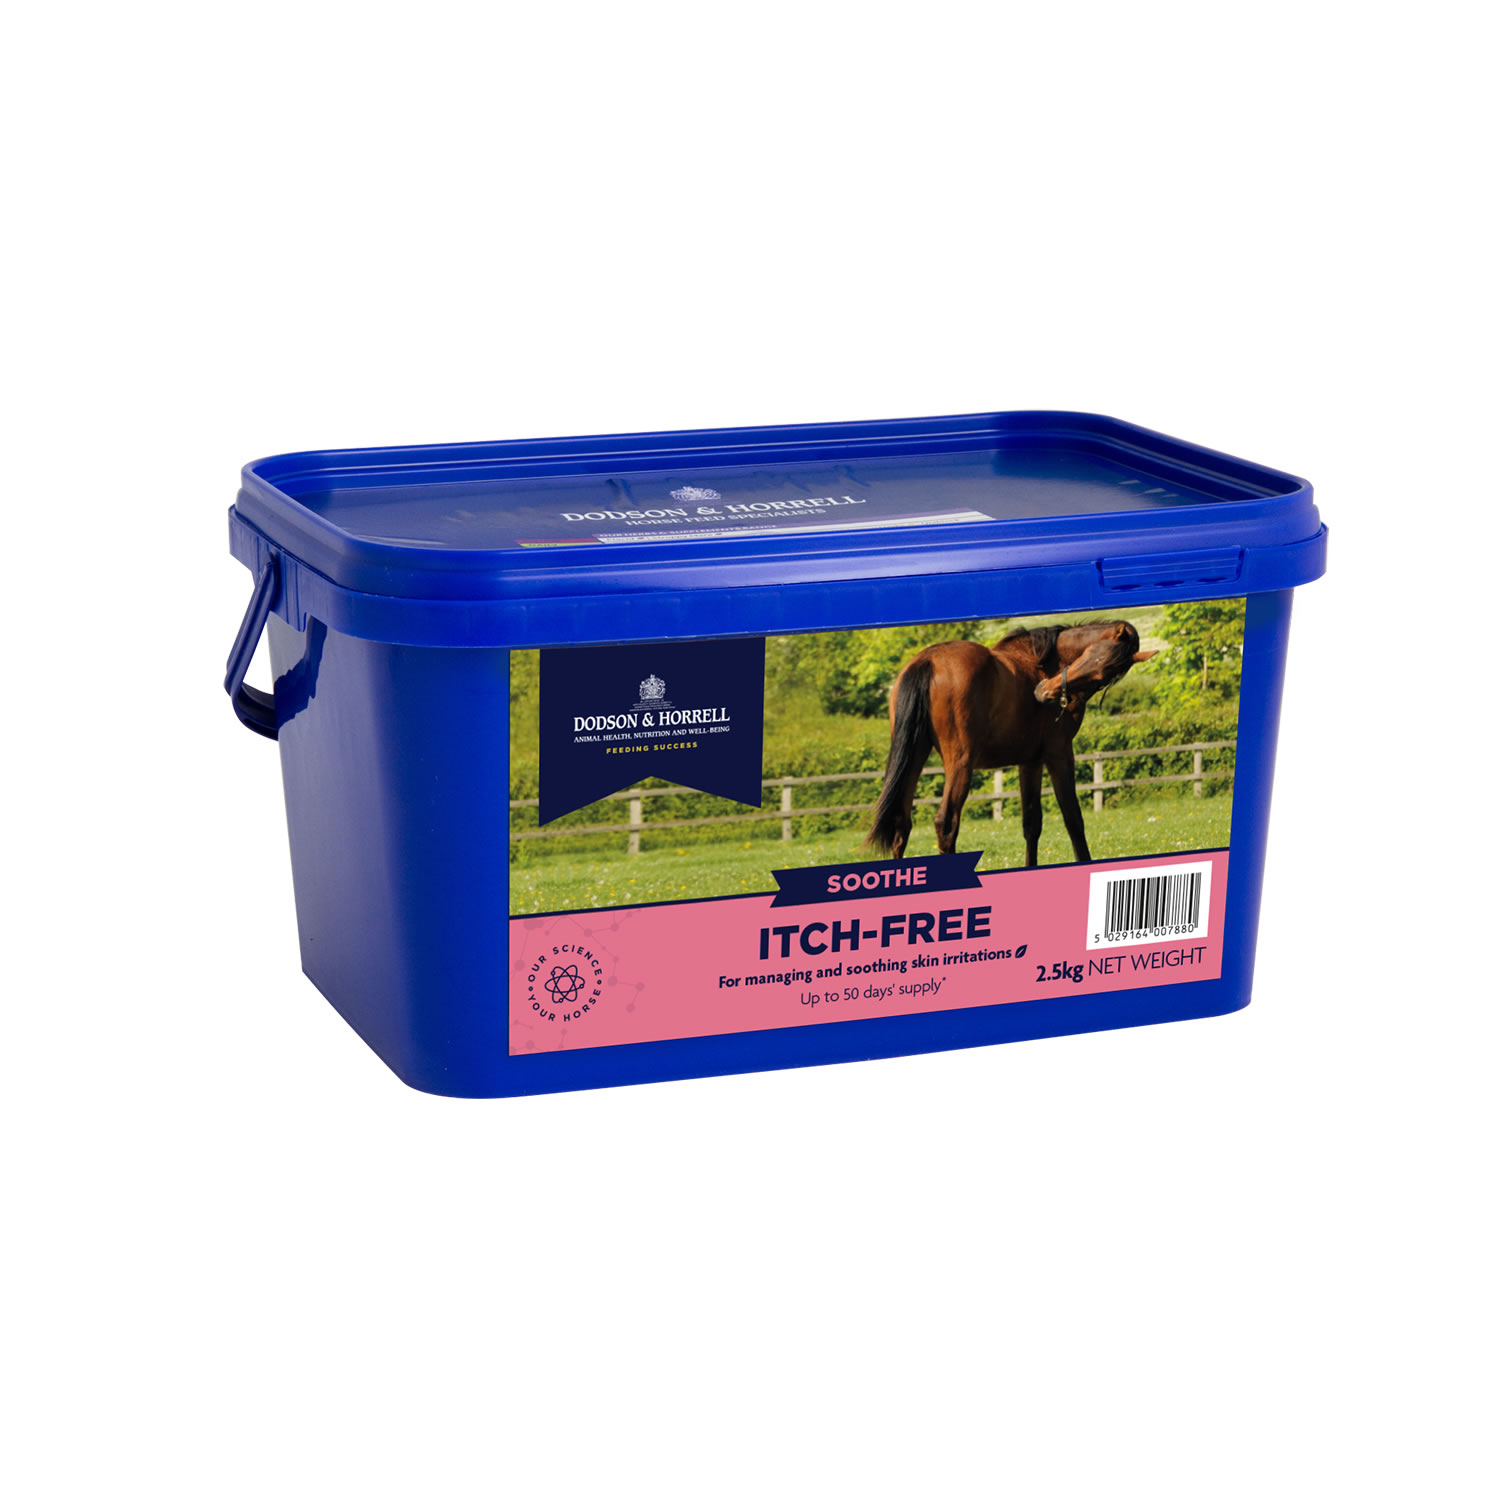 DODSON & HORRELL ITCH-FREE 2.5 KG 2.5 KG